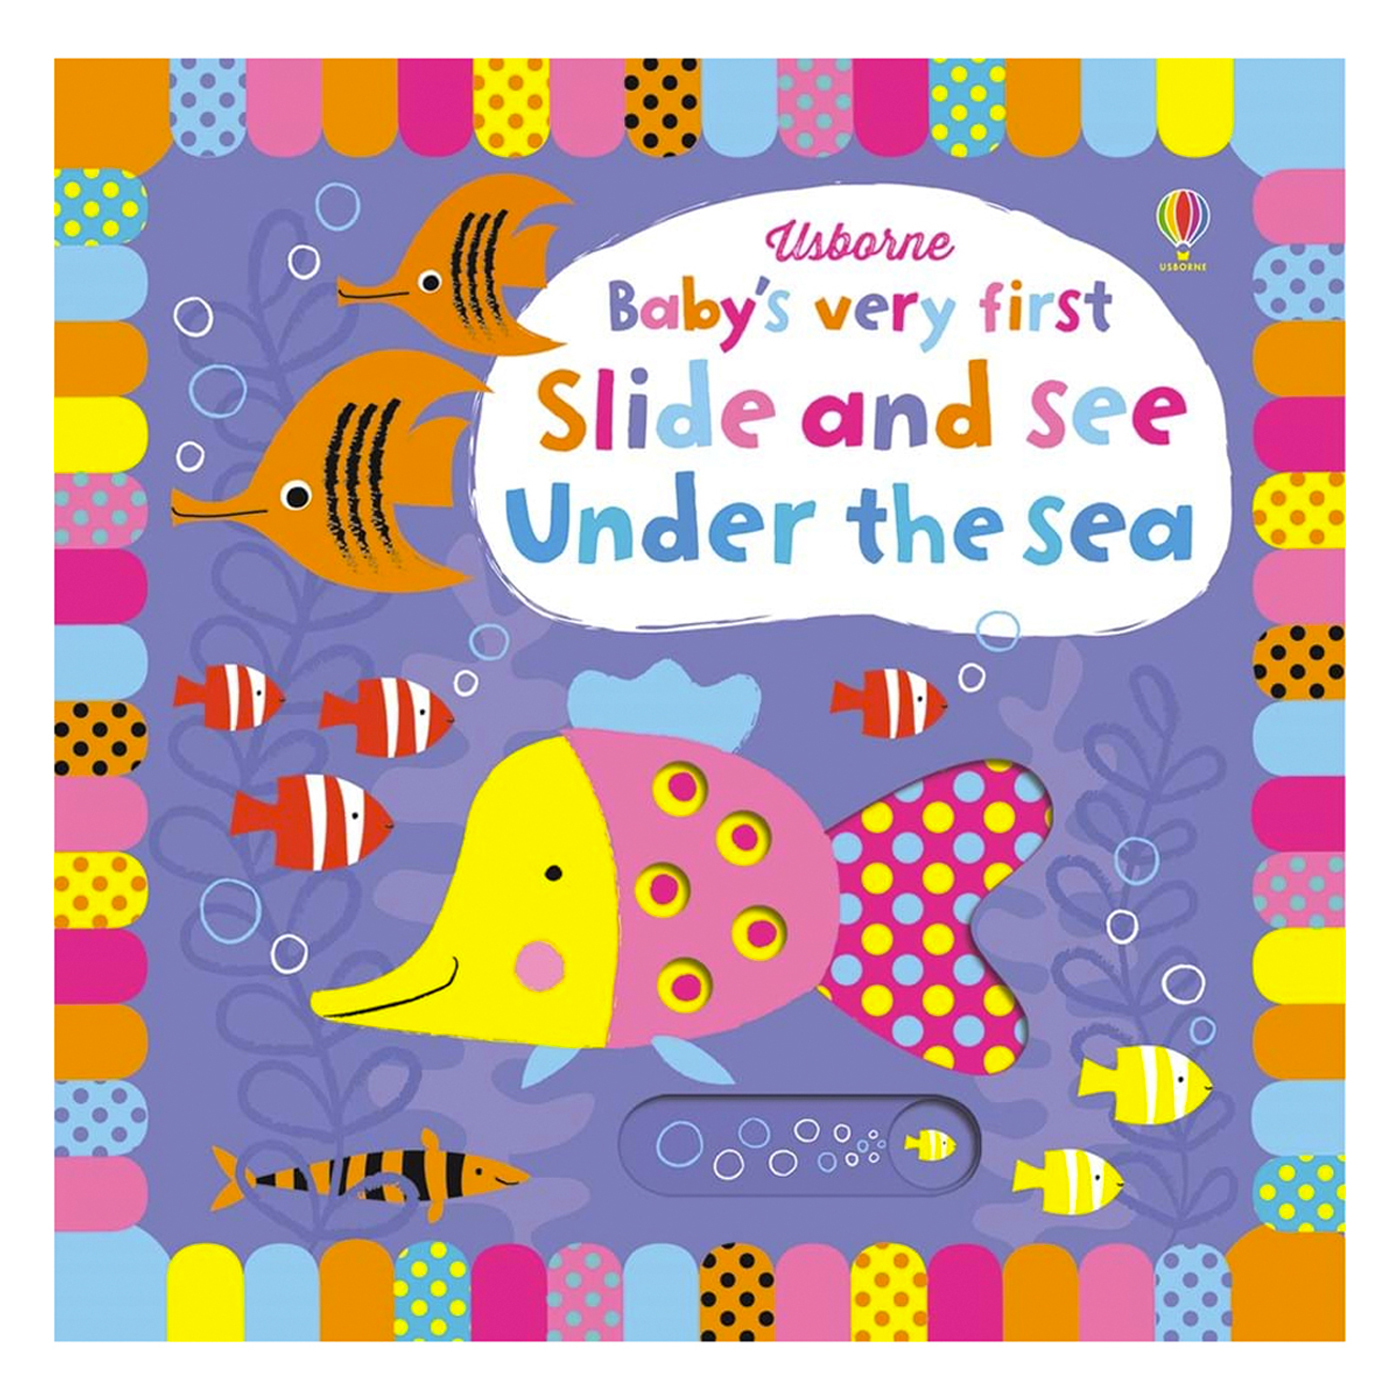 USBORNE Baby's Very First Slide and See: Under The Sea